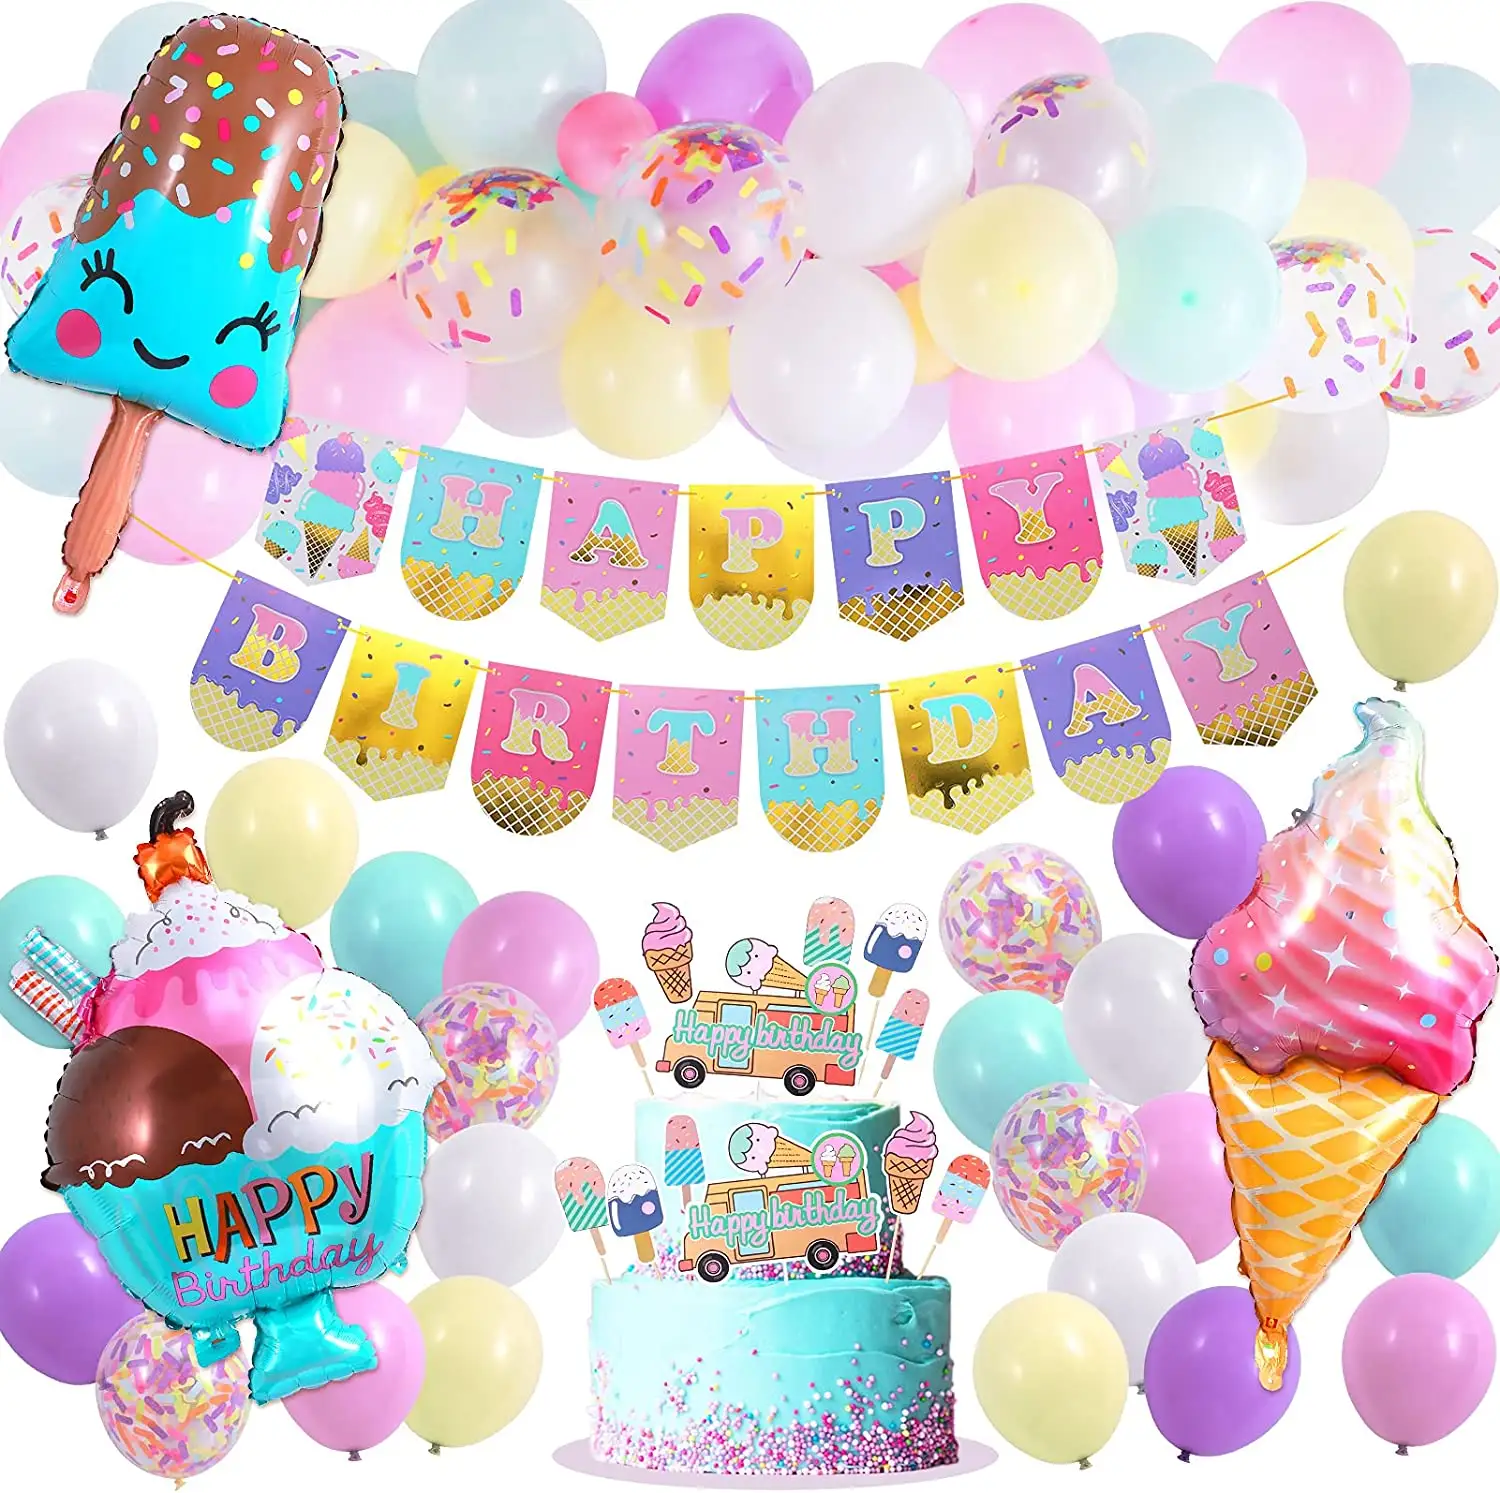 Sweet Ice Cream Baby Girl 1st Birthday Party Decor Macaron Confetti Foil Balloons Arch Garland Party Supplies Decorations sets